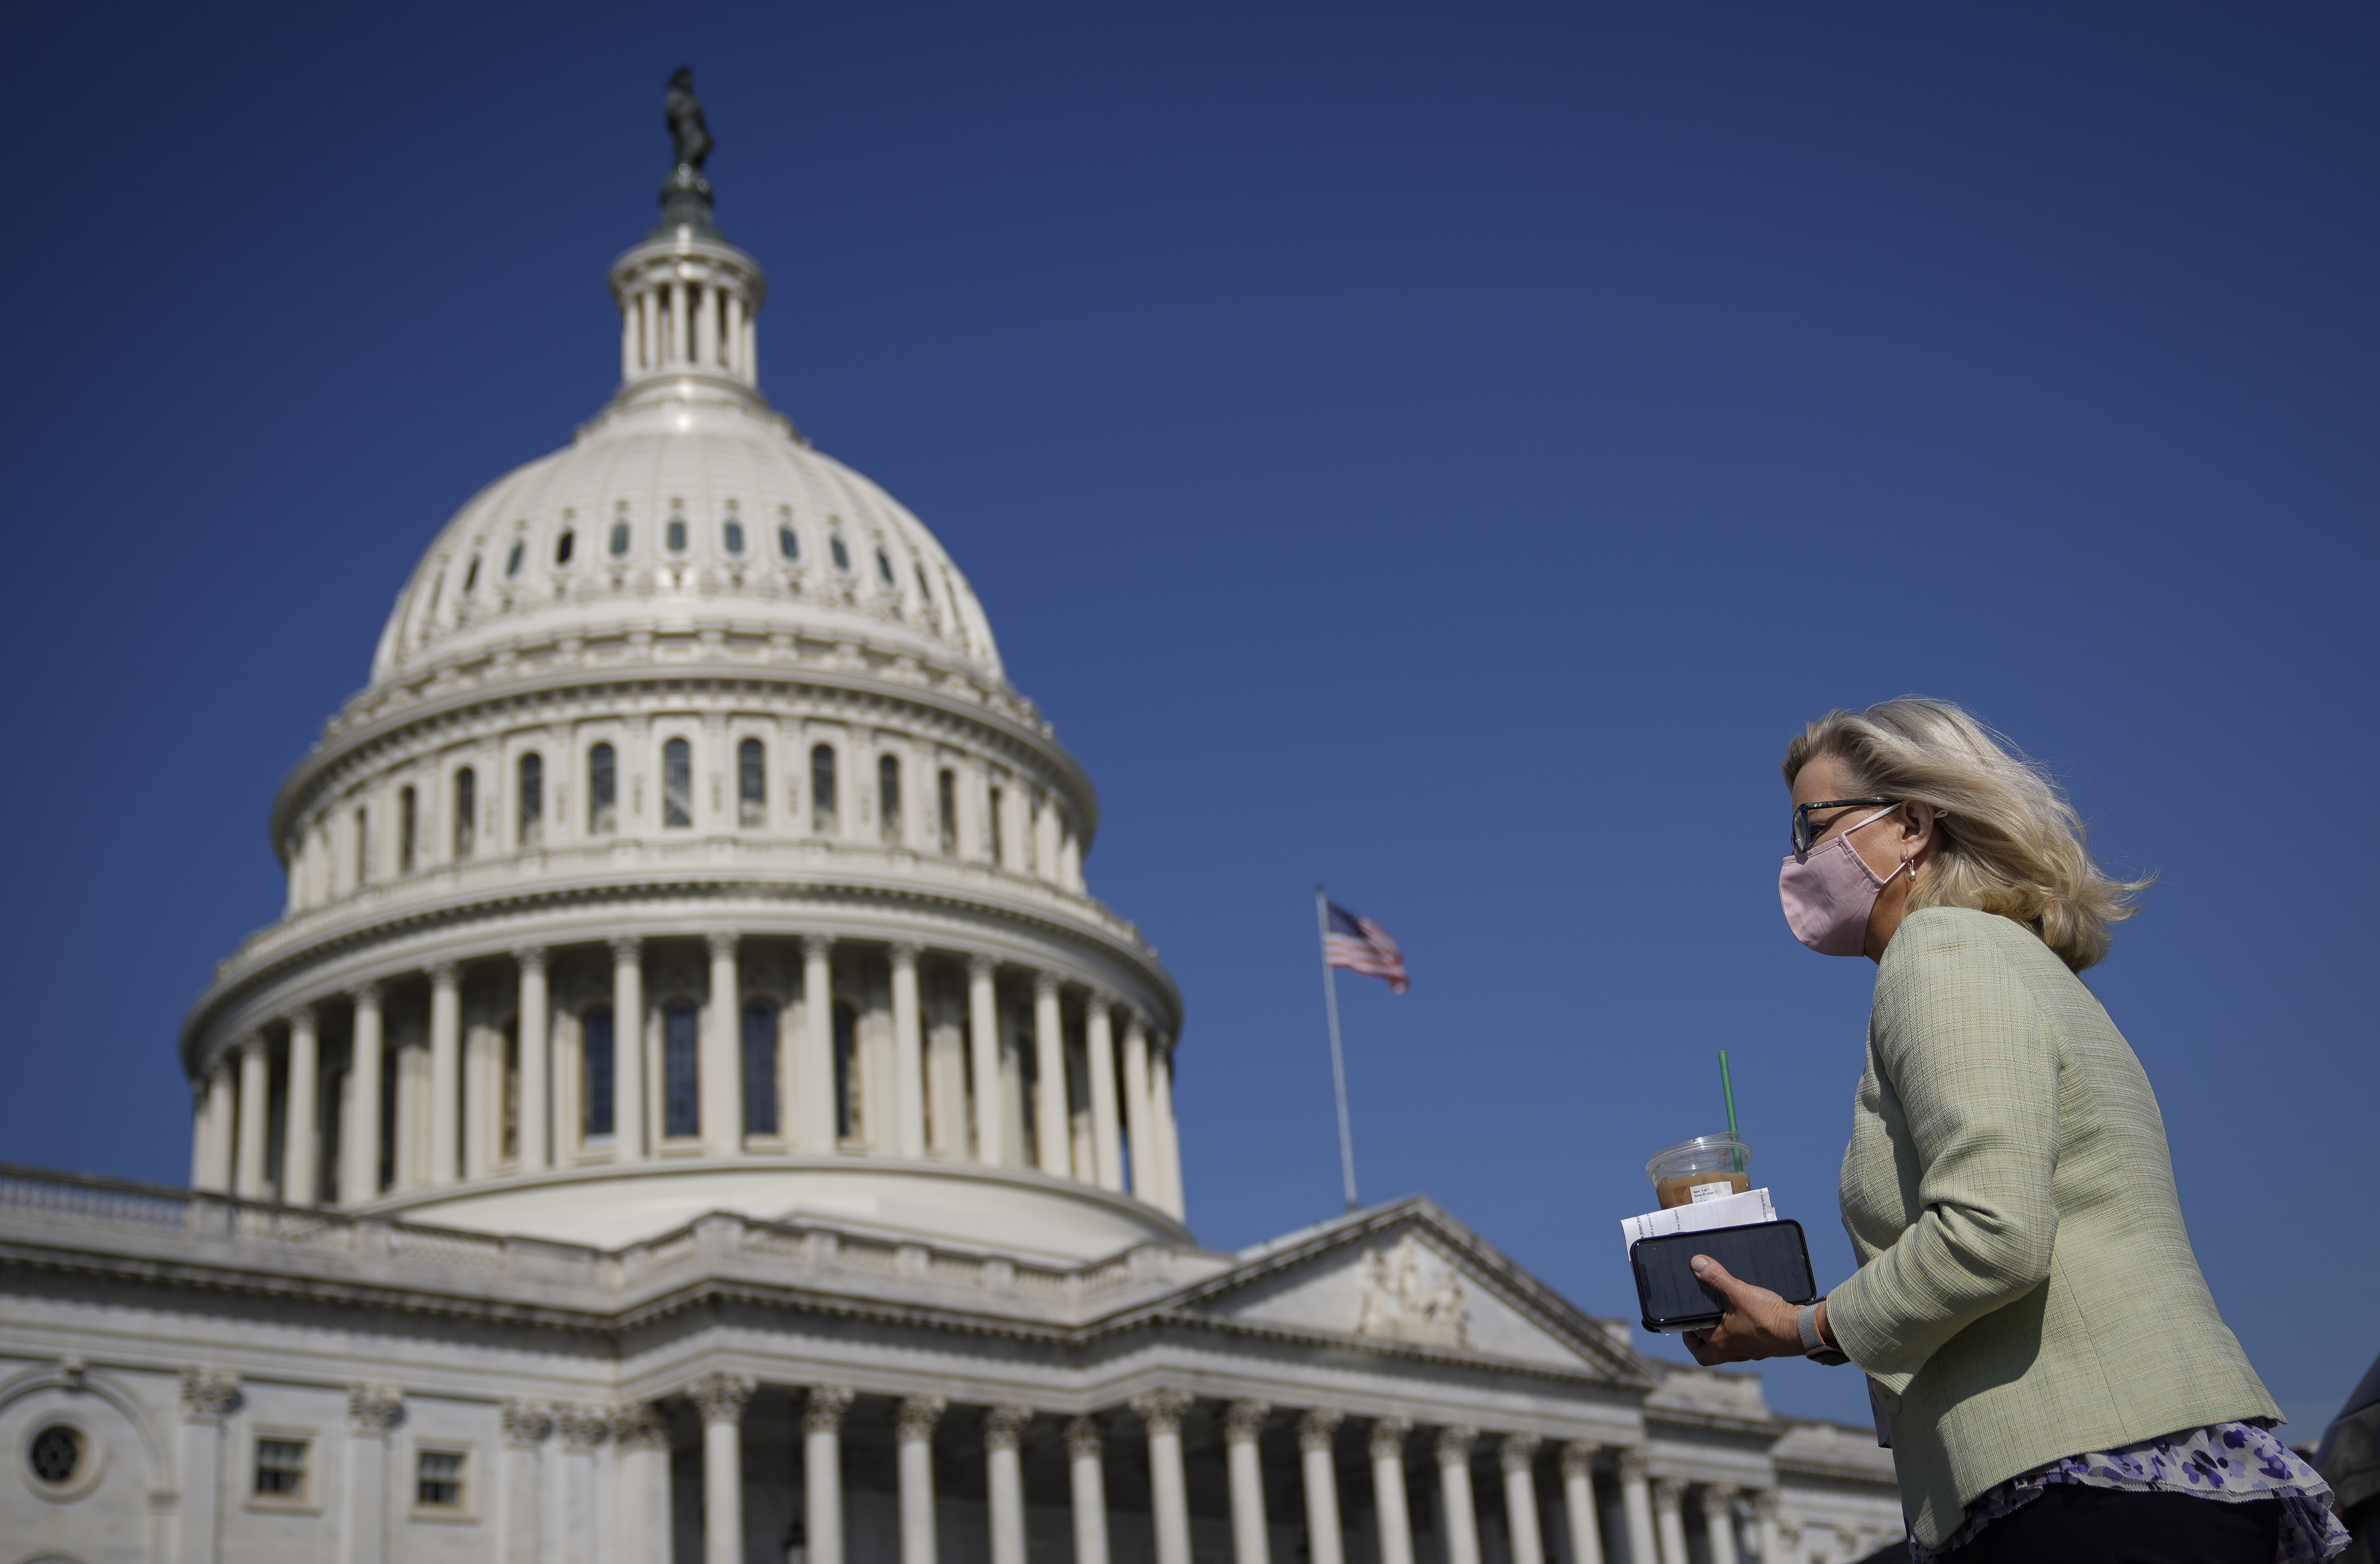 Rep. Liz Cheney of Wyoming, seen here outside the U.S. Capitol on March 11, has been removed from a House leadership role. She beat back an effort in February. CREDIT: Drew Angerer/Getty Images